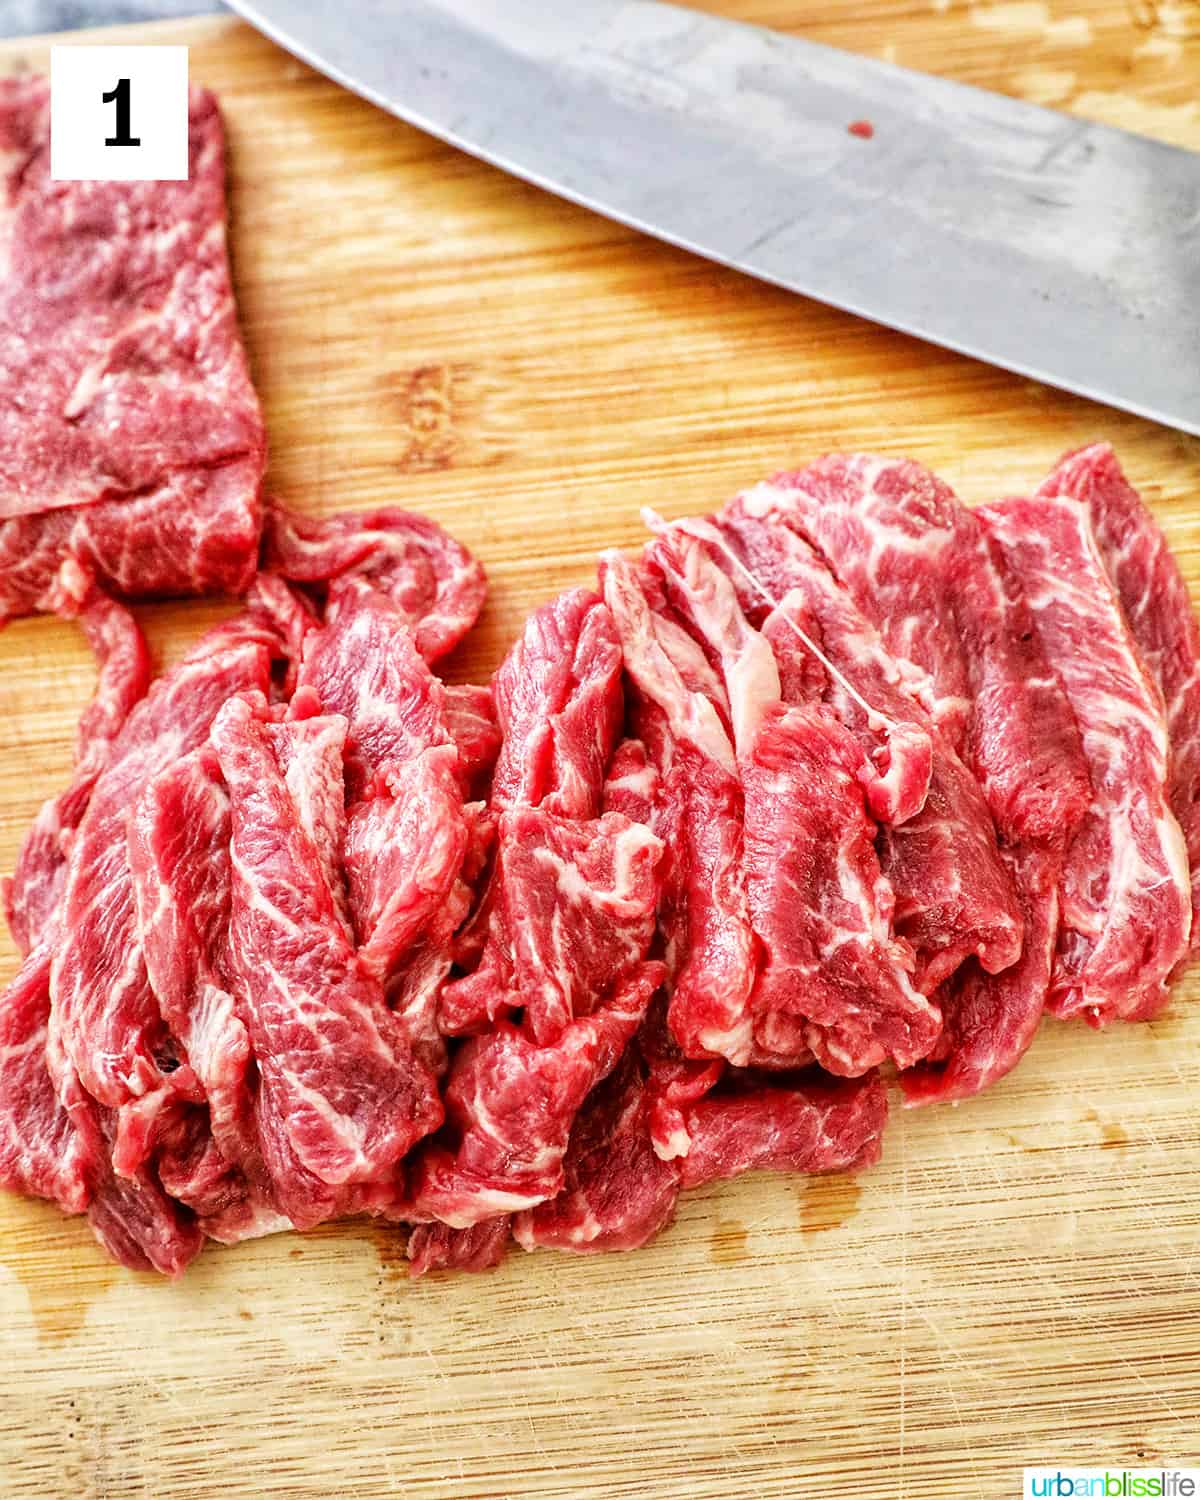 steak sliced thinly on a cutting board with a knife.